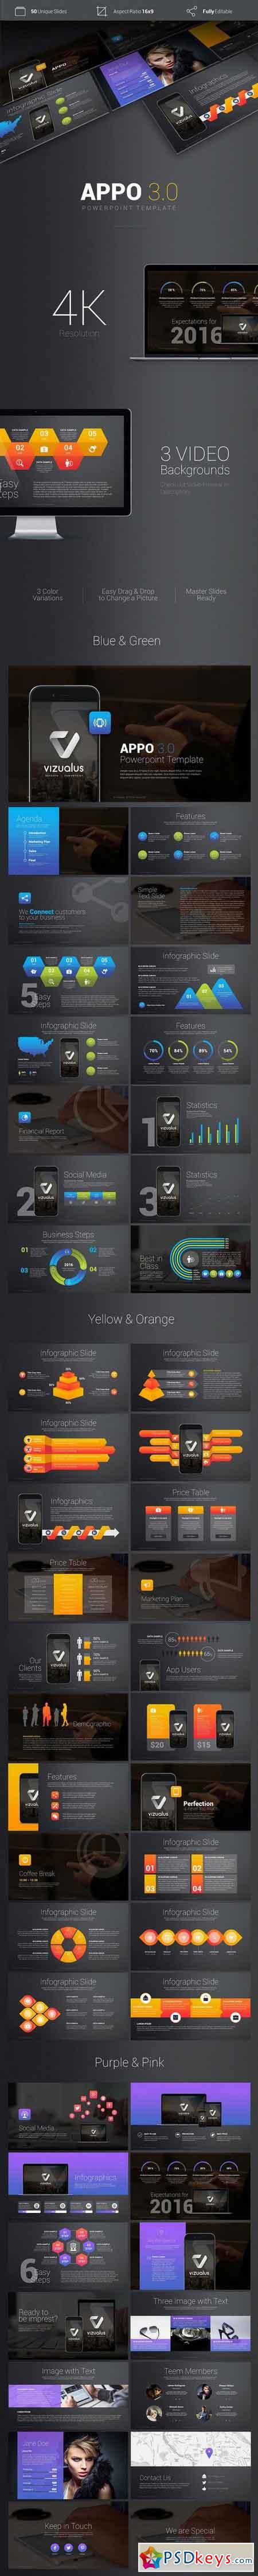 APPO 3.0 Powerpoint Template 909673